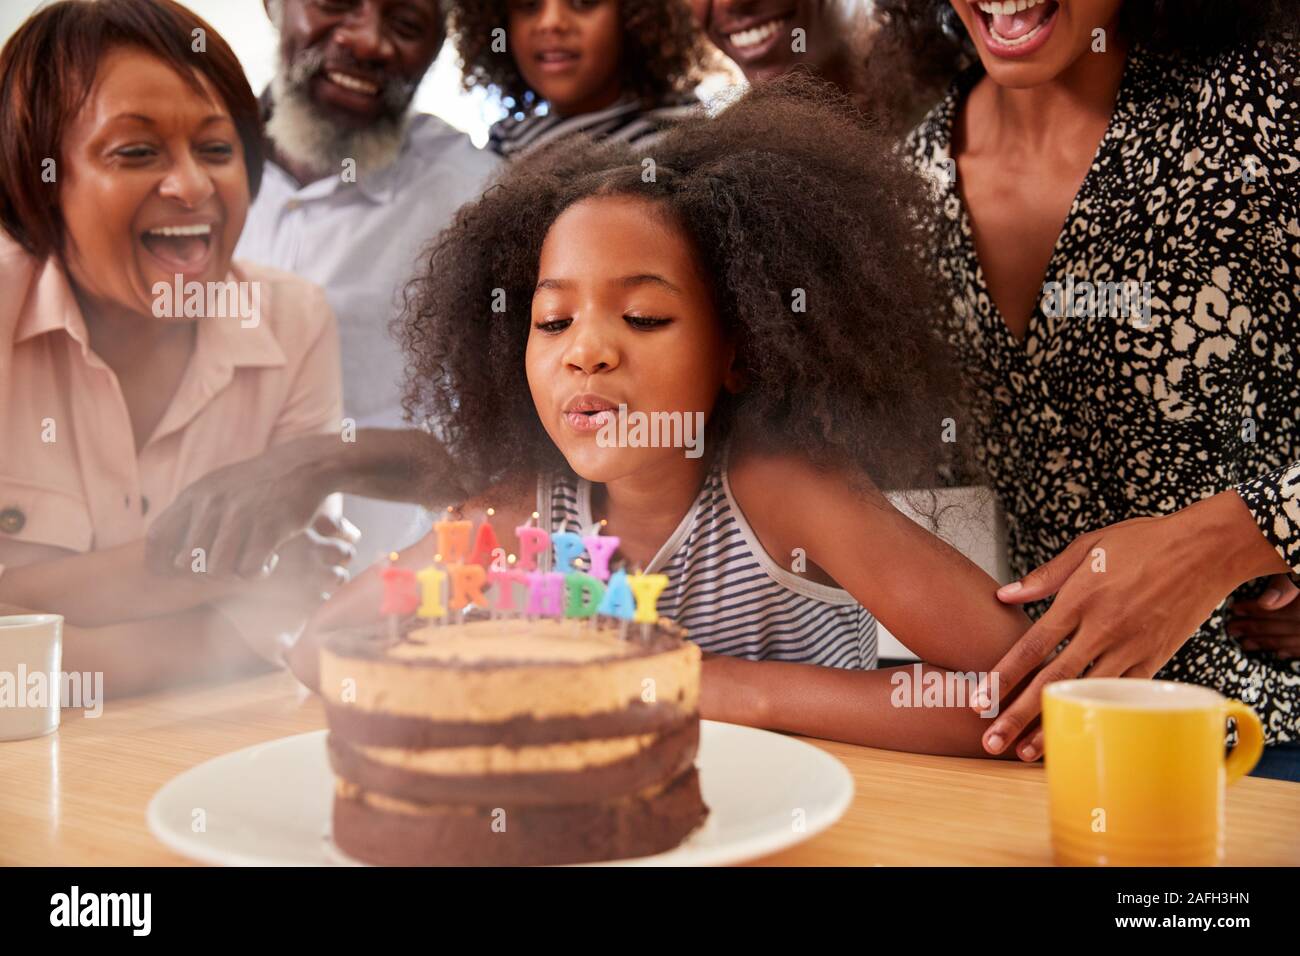 Multi-Generation Family Celebrating Granddaughters Birthday At Home With Cake And Candles Stock Photo